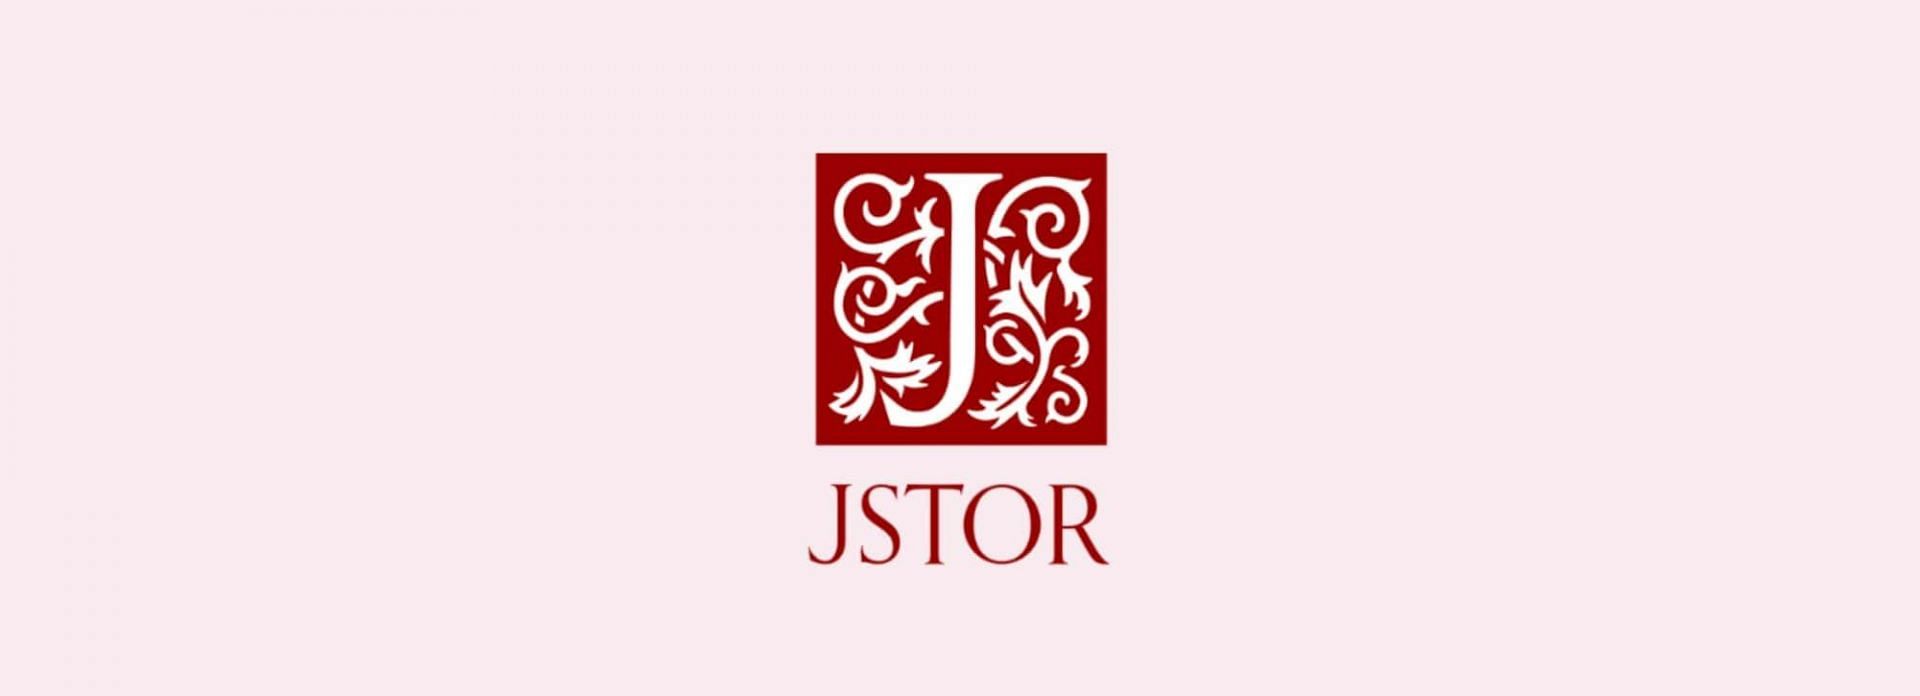 A trusted source for research purposes (Image via Jstor)